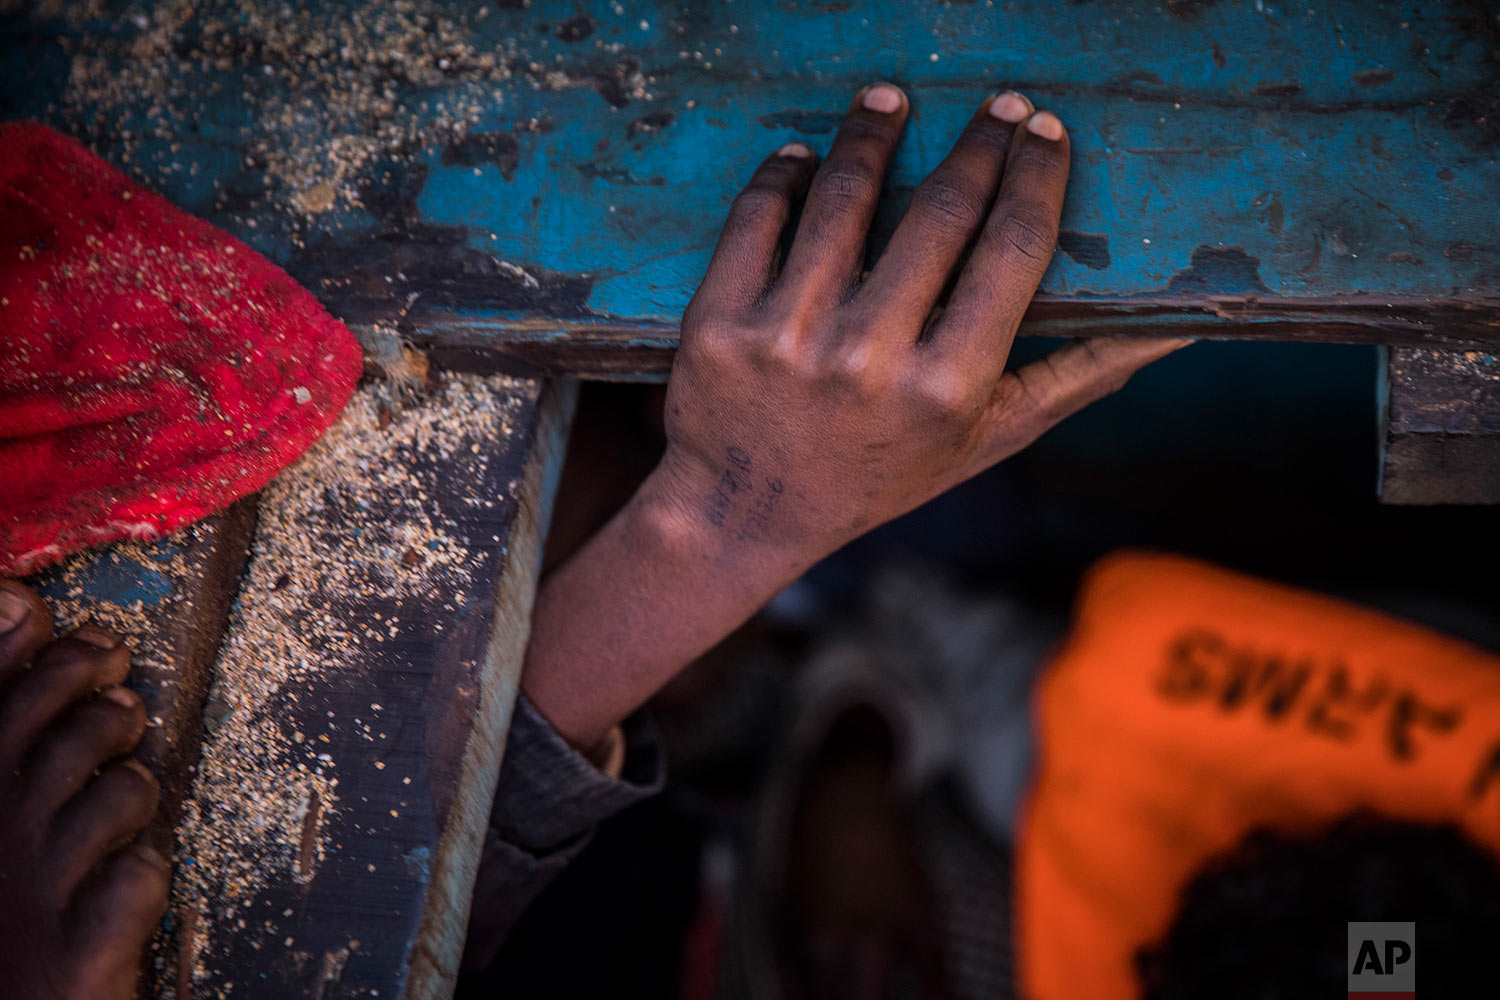  In this Tuesday, Jan. 16, 2018 photo, a boy from Eritrea tries to leave the lower deck of a wooden boat with 450 people on board, as they were trying to leave the Libyan coast and reach European soil, 34 miles north of Kasr-El-Karabulli, Libya. (AP Photo/Santi Palacios)&nbsp; |&nbsp; See these photos on AP Images  